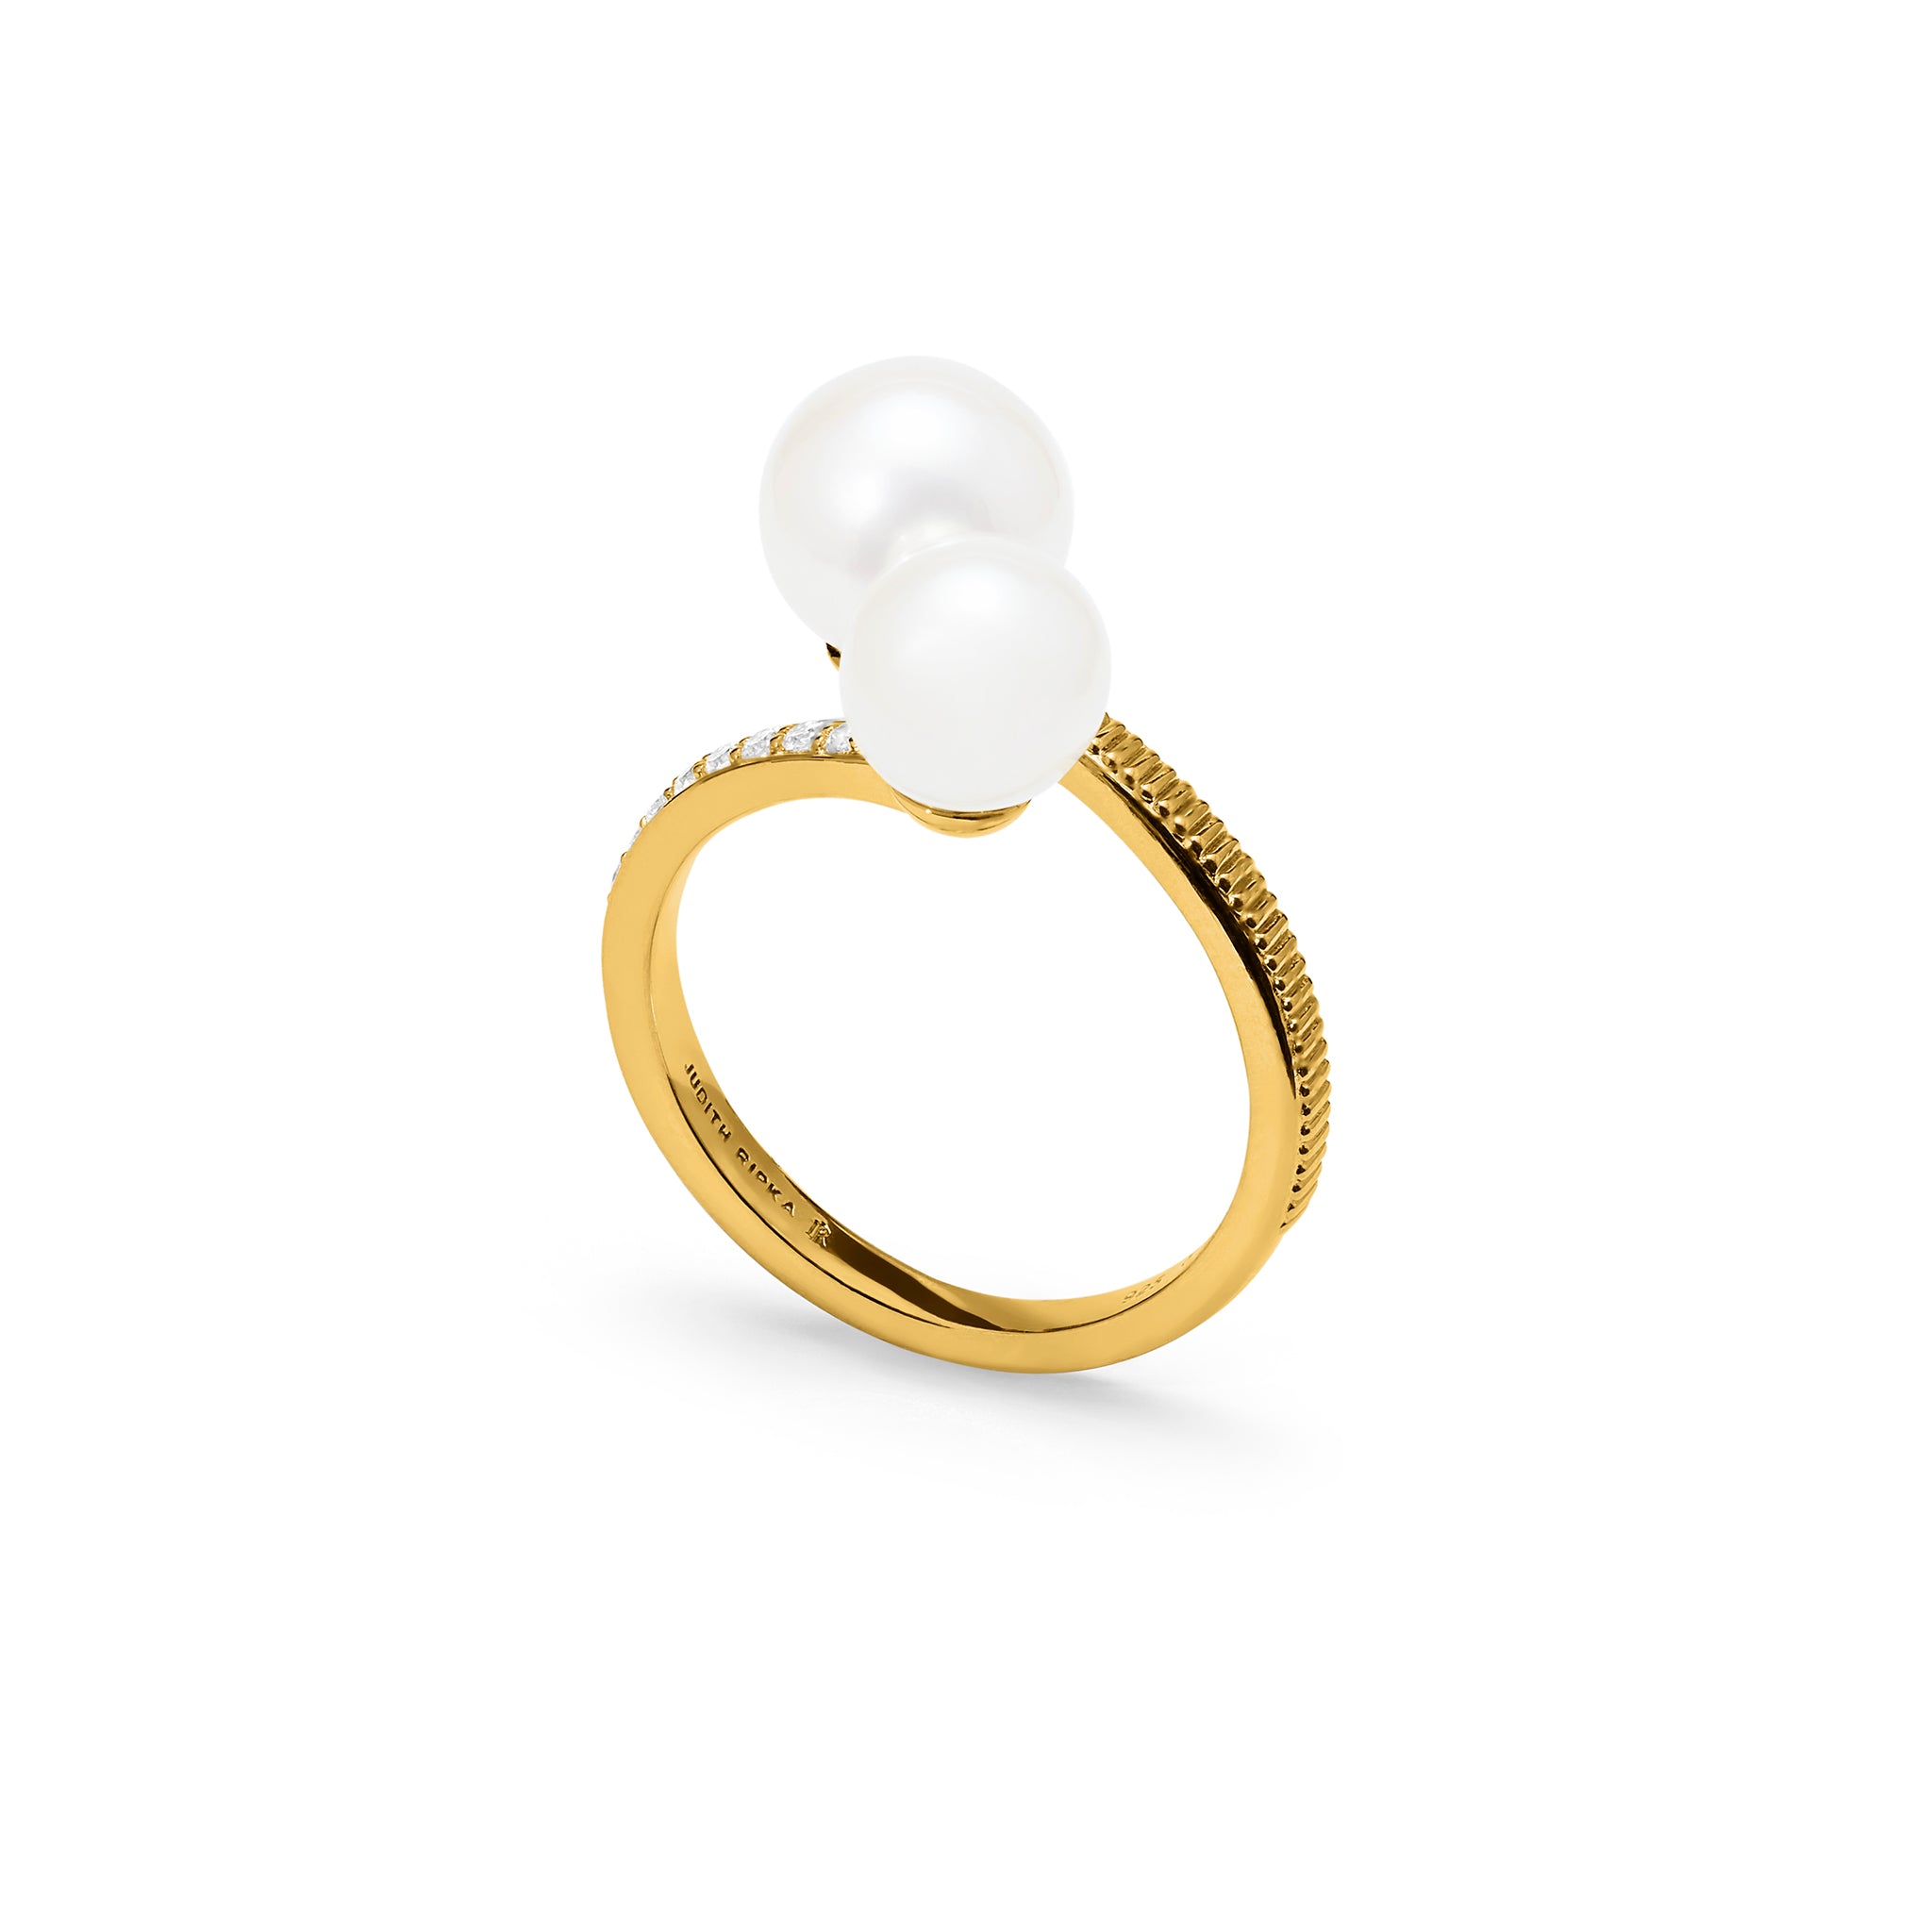 Shima Bypass Ring with Freshwater Pearls and Diamonds in 18K